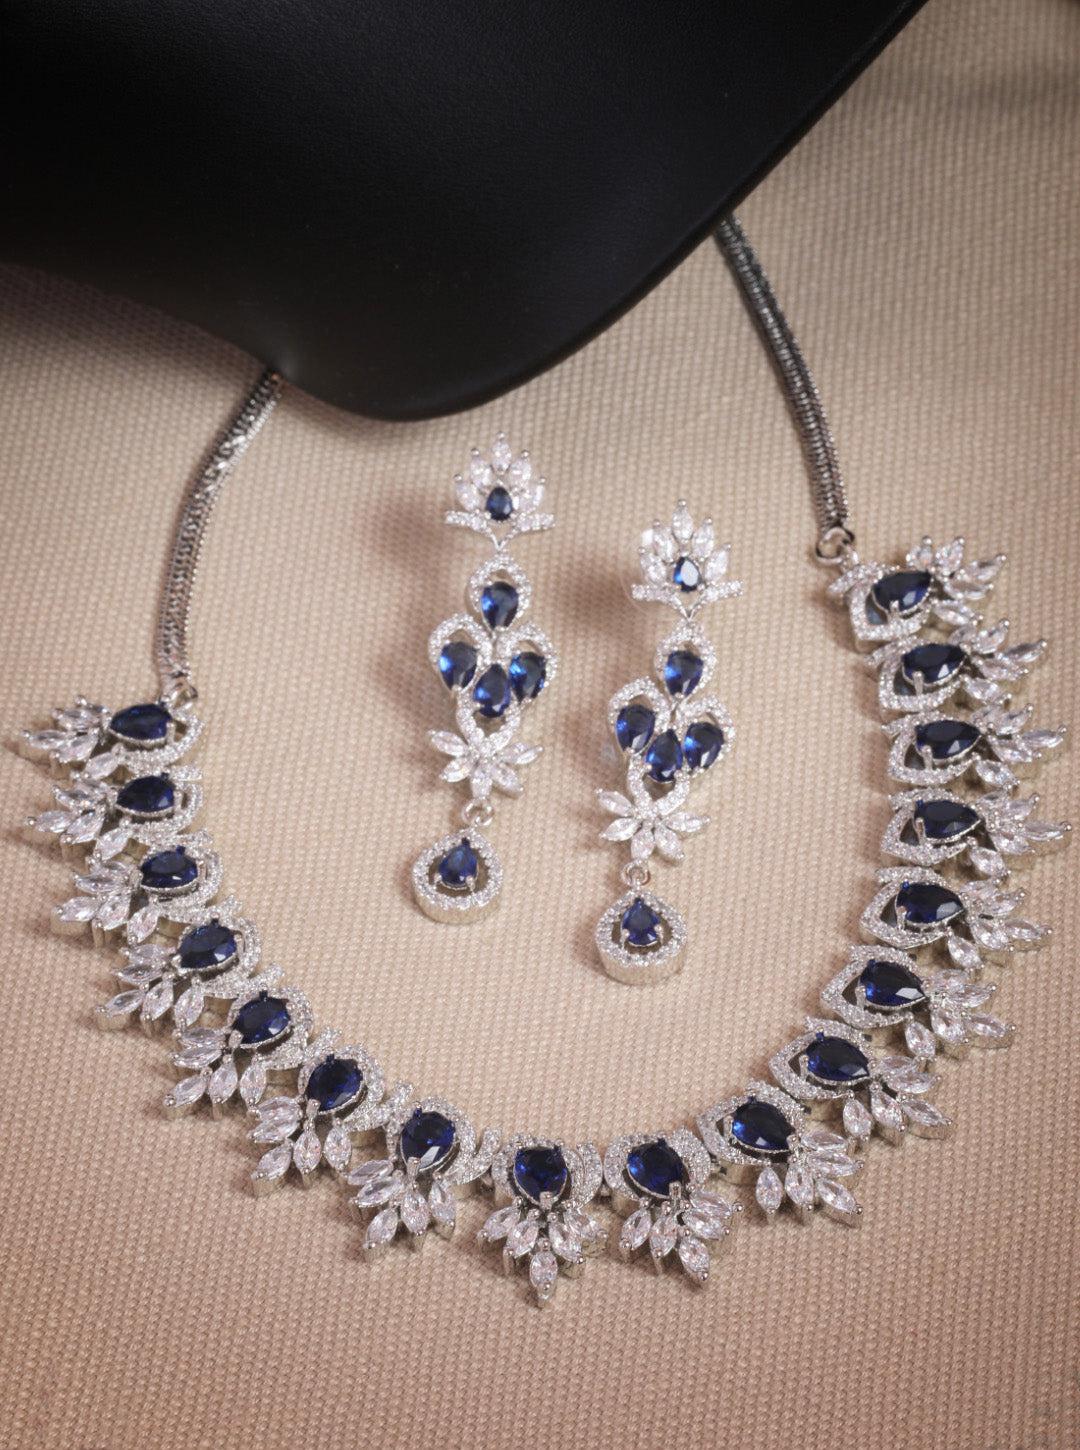 Premium Rose Gold Plated with sparkling Blue and White CZ stones designer Necklace Set 8943N